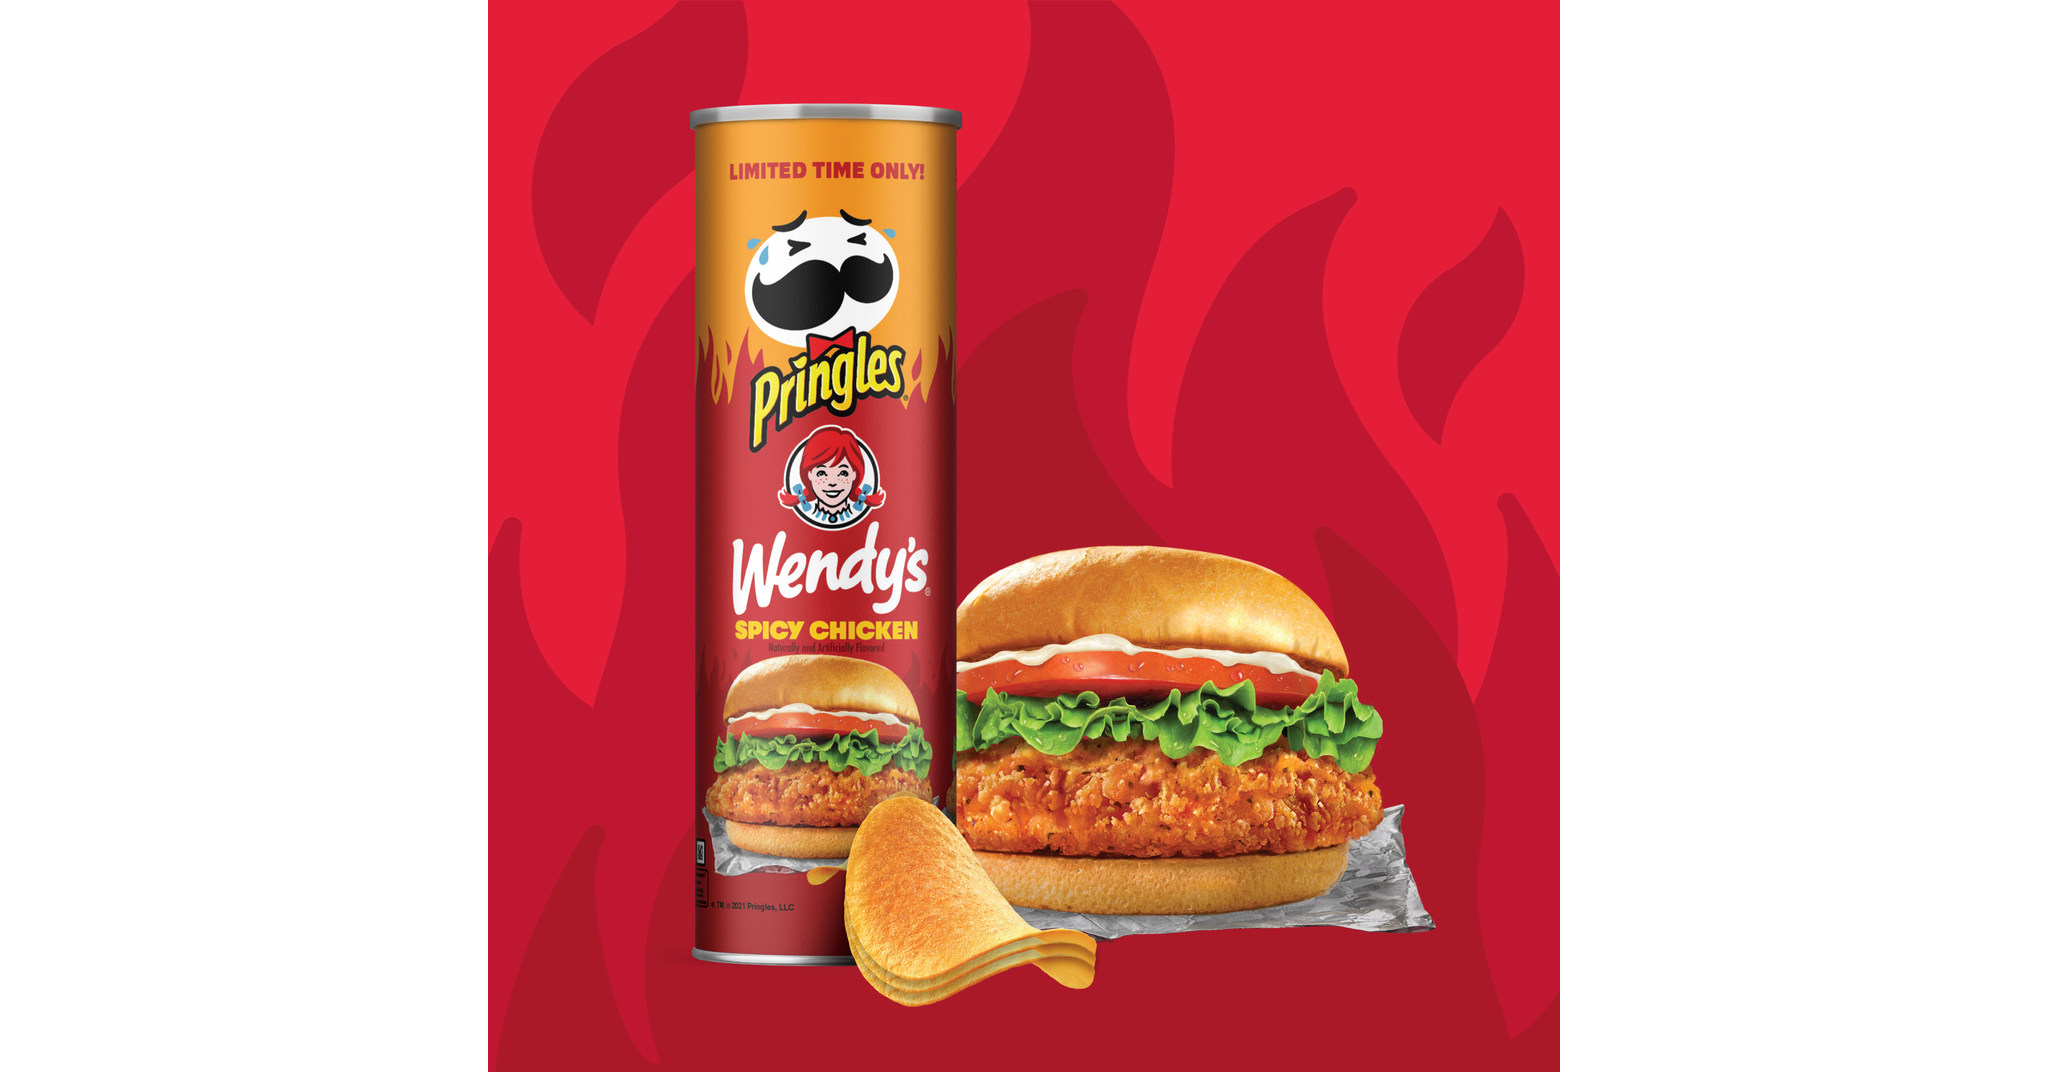 New LimitedEdition Pringles® Flavor Gives Wendy's® Spicy